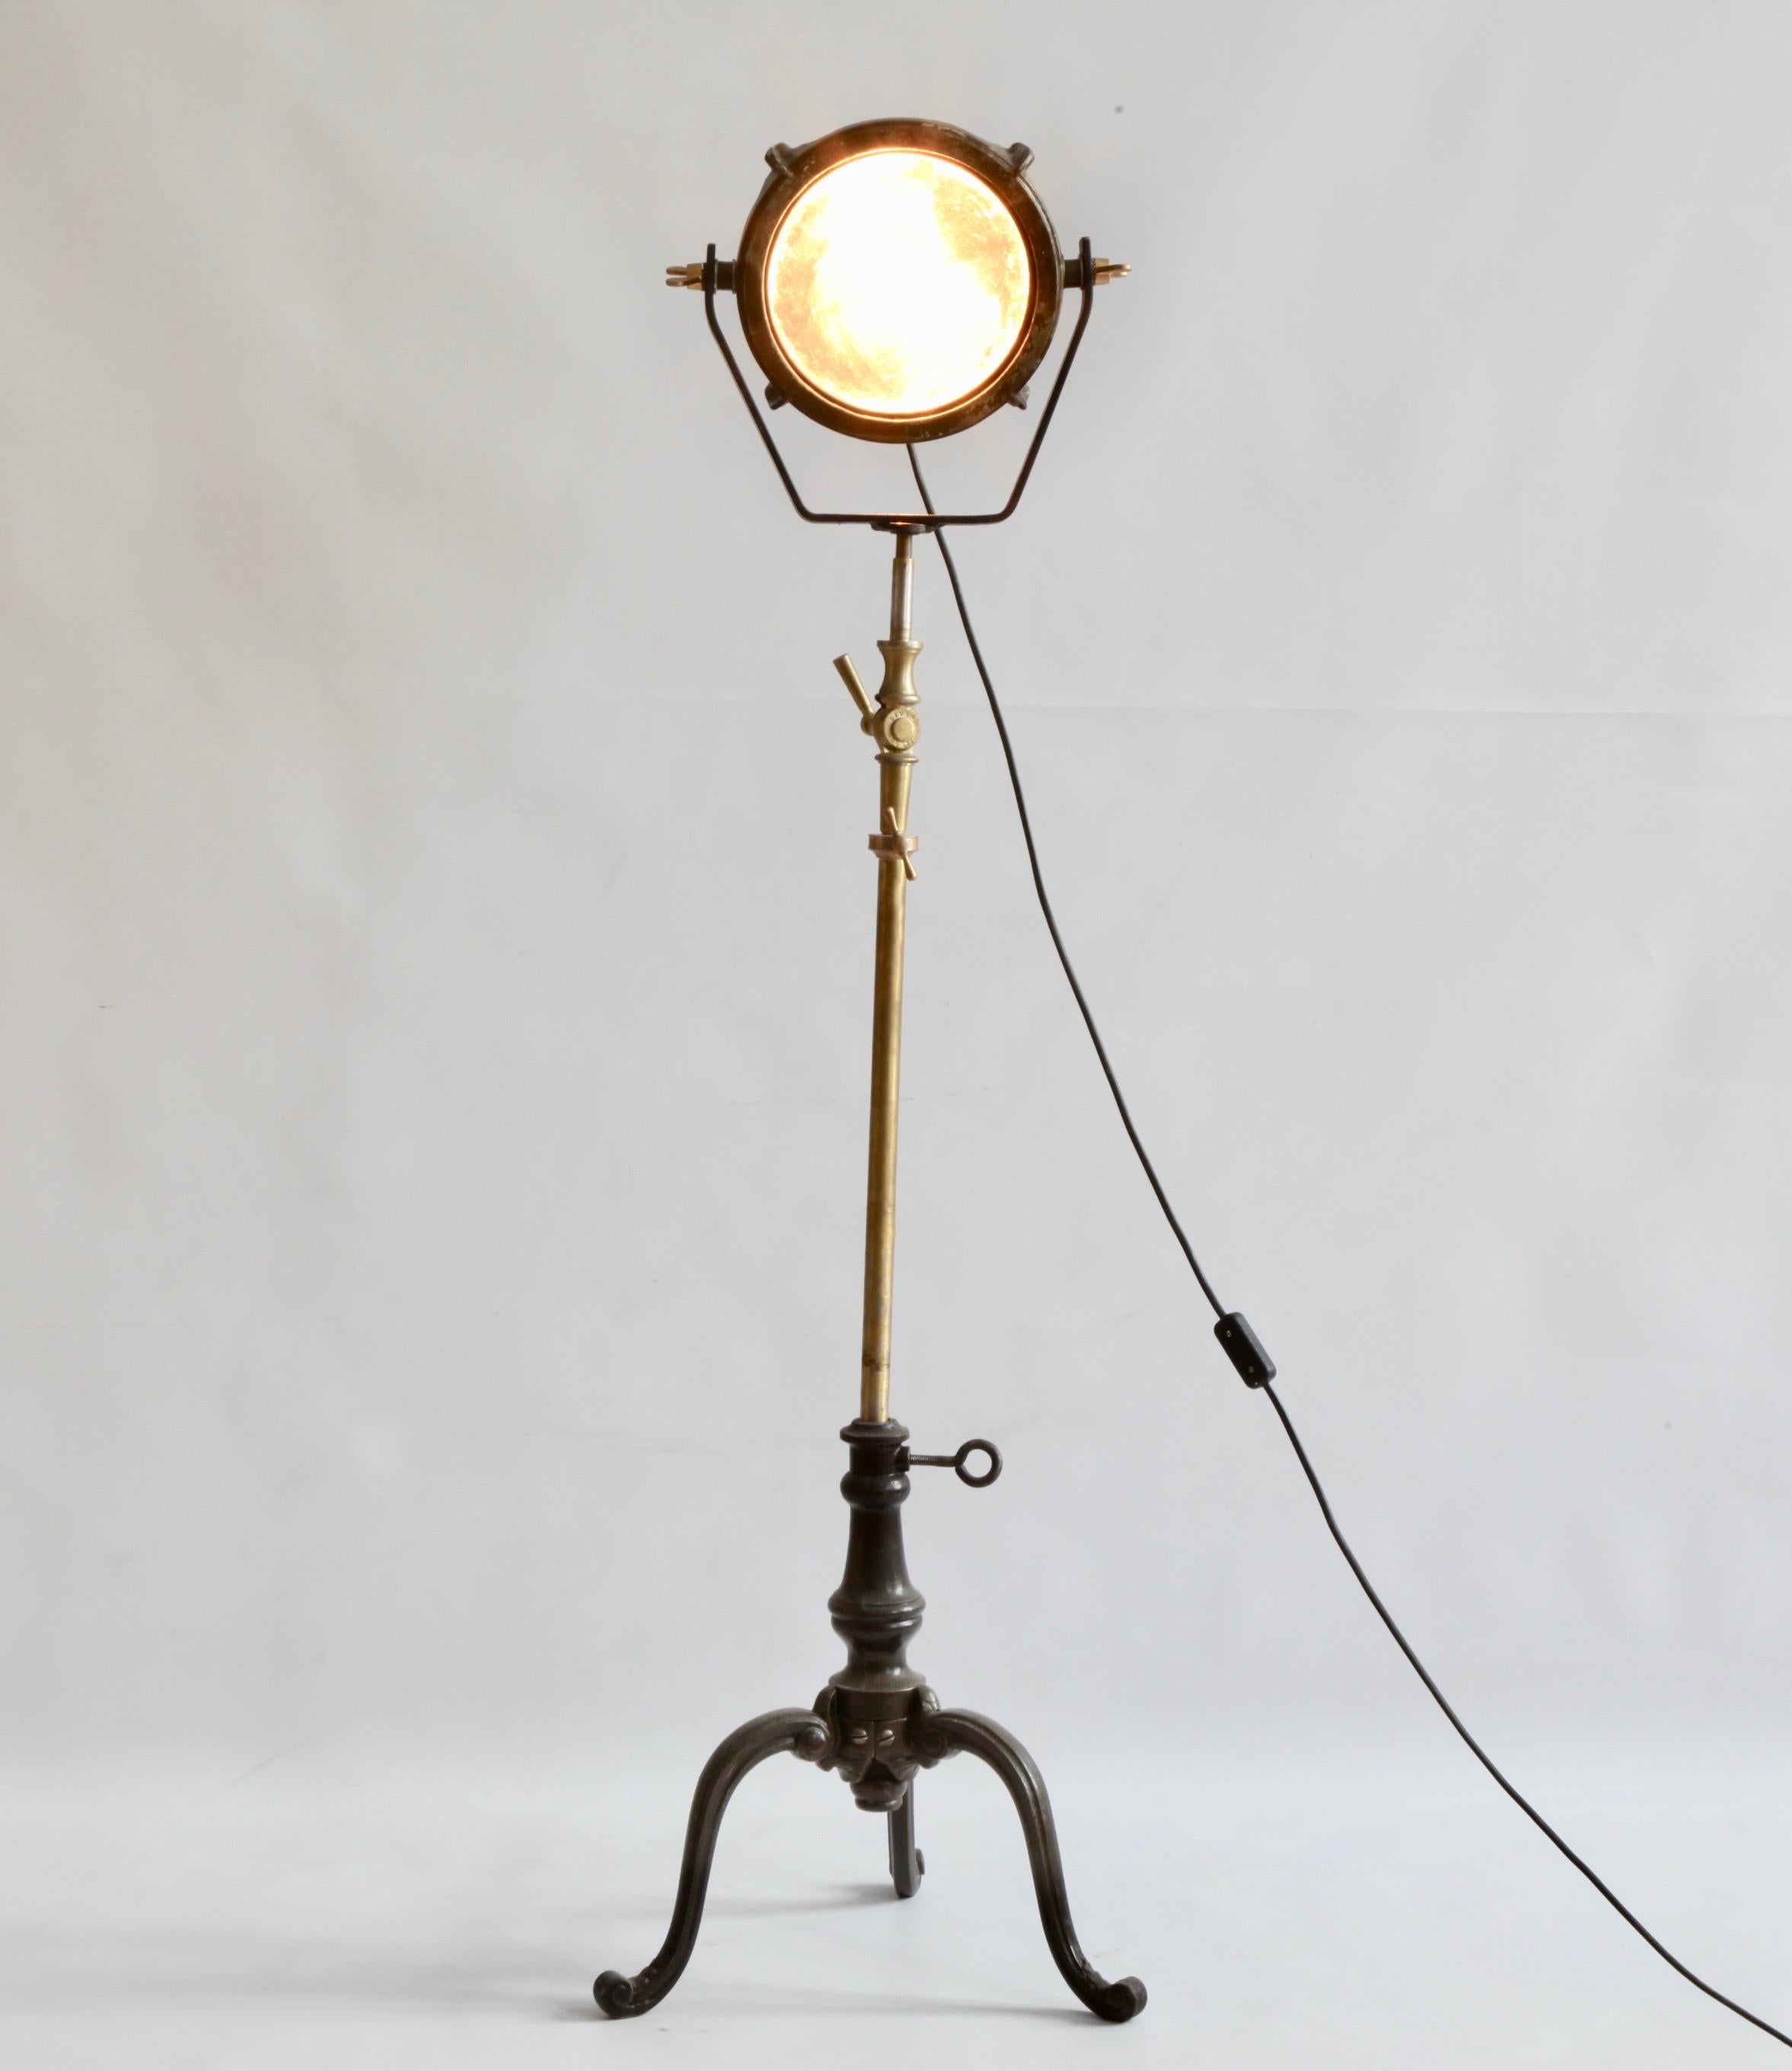 Midcentury French Industrial freestanding light made from metal and brass components. Adjustable to size.